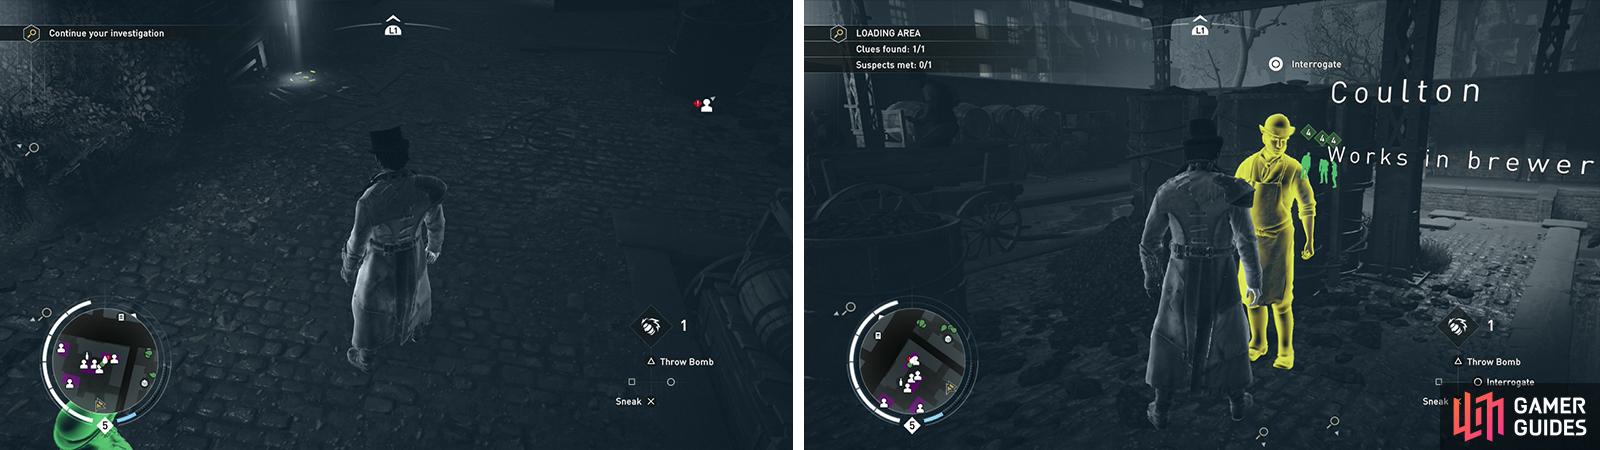 Investigate the clues by the loading area (left) and speak with the suspect (right).